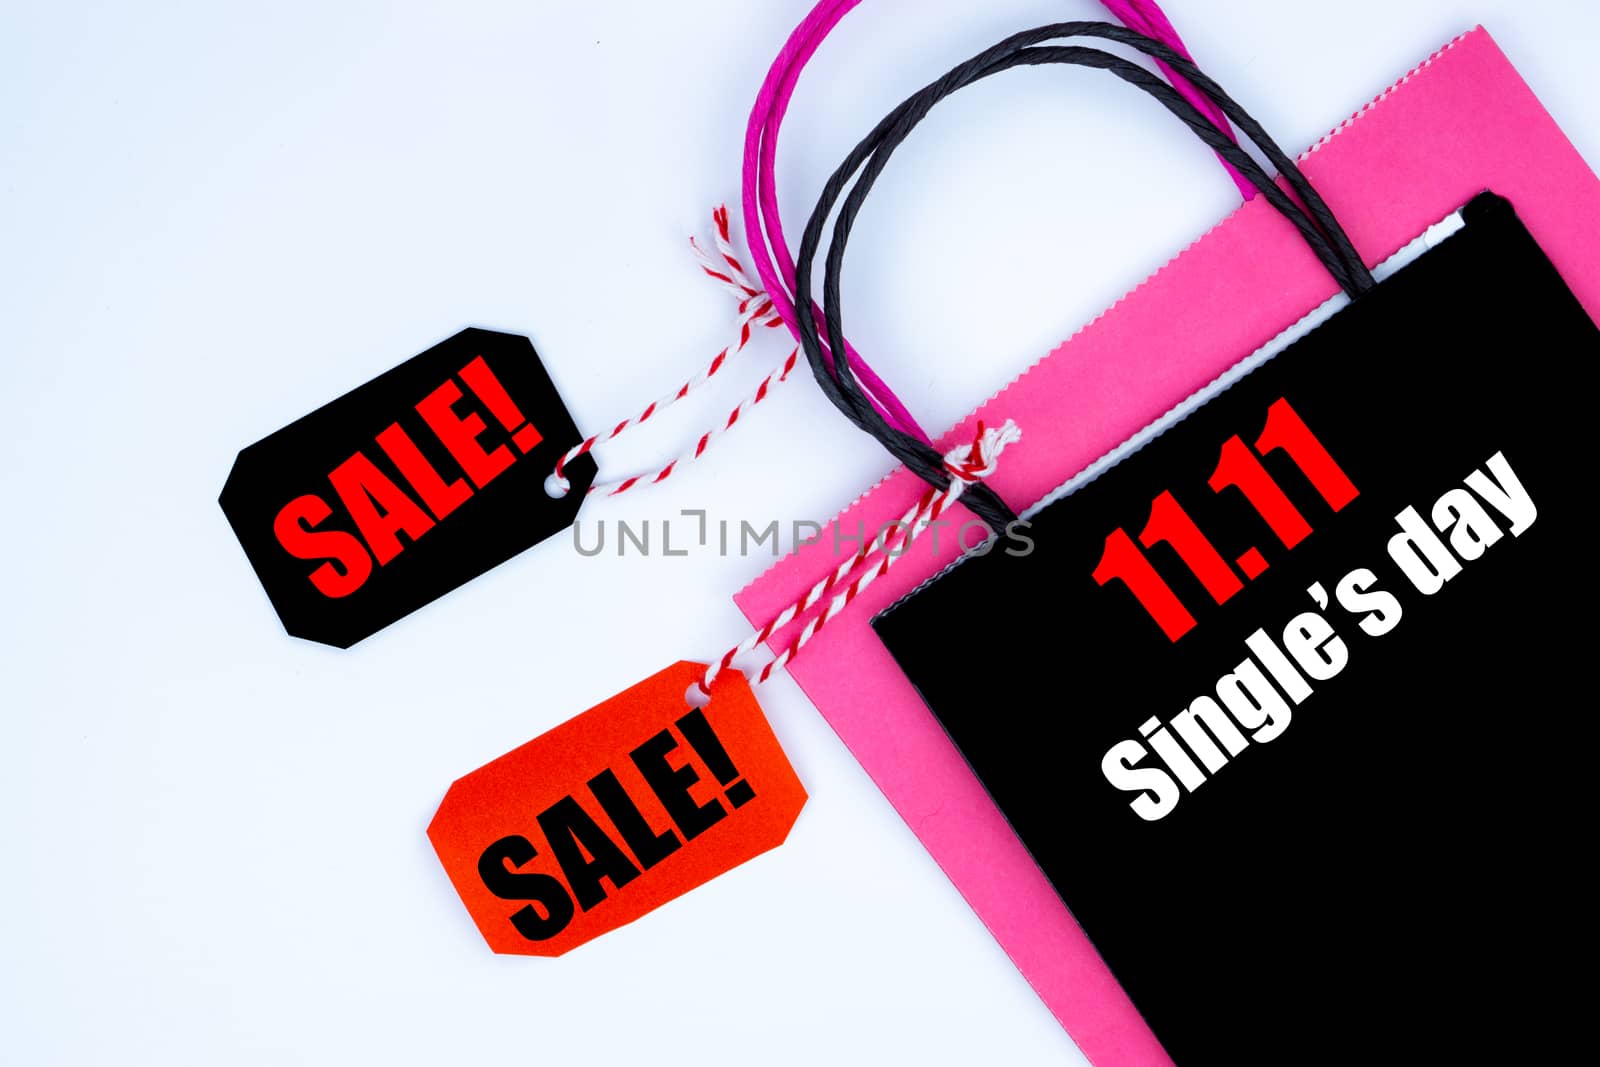 The shopping bag and tag sale on a white background with copy space for text.Online shopping of China, 11.11 single's day sale concept